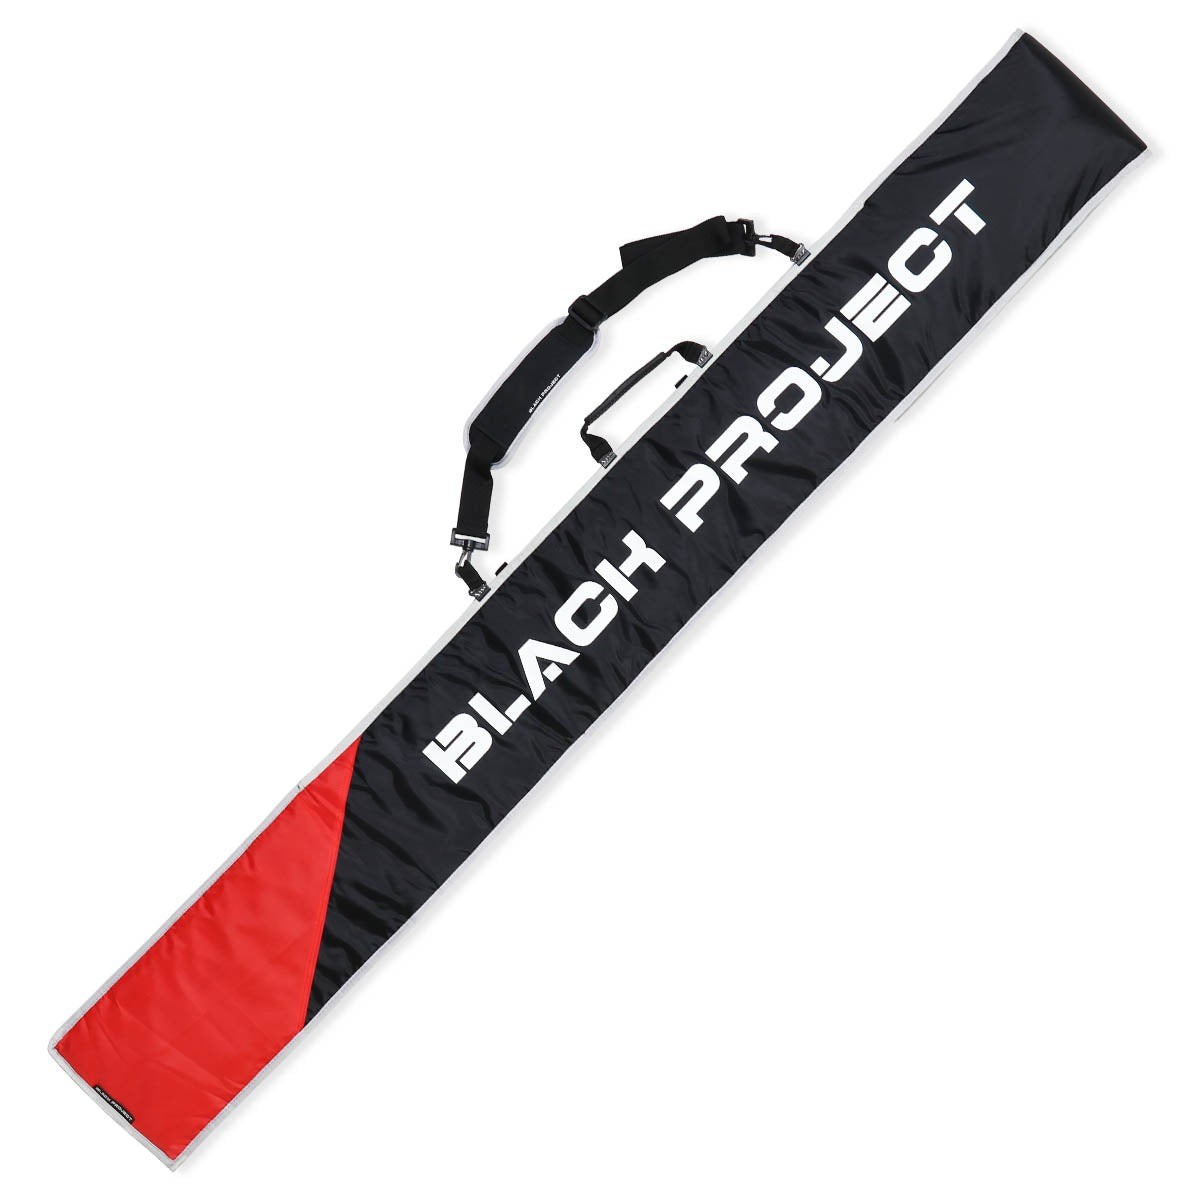 Black Project SUP Paddel Tasche.